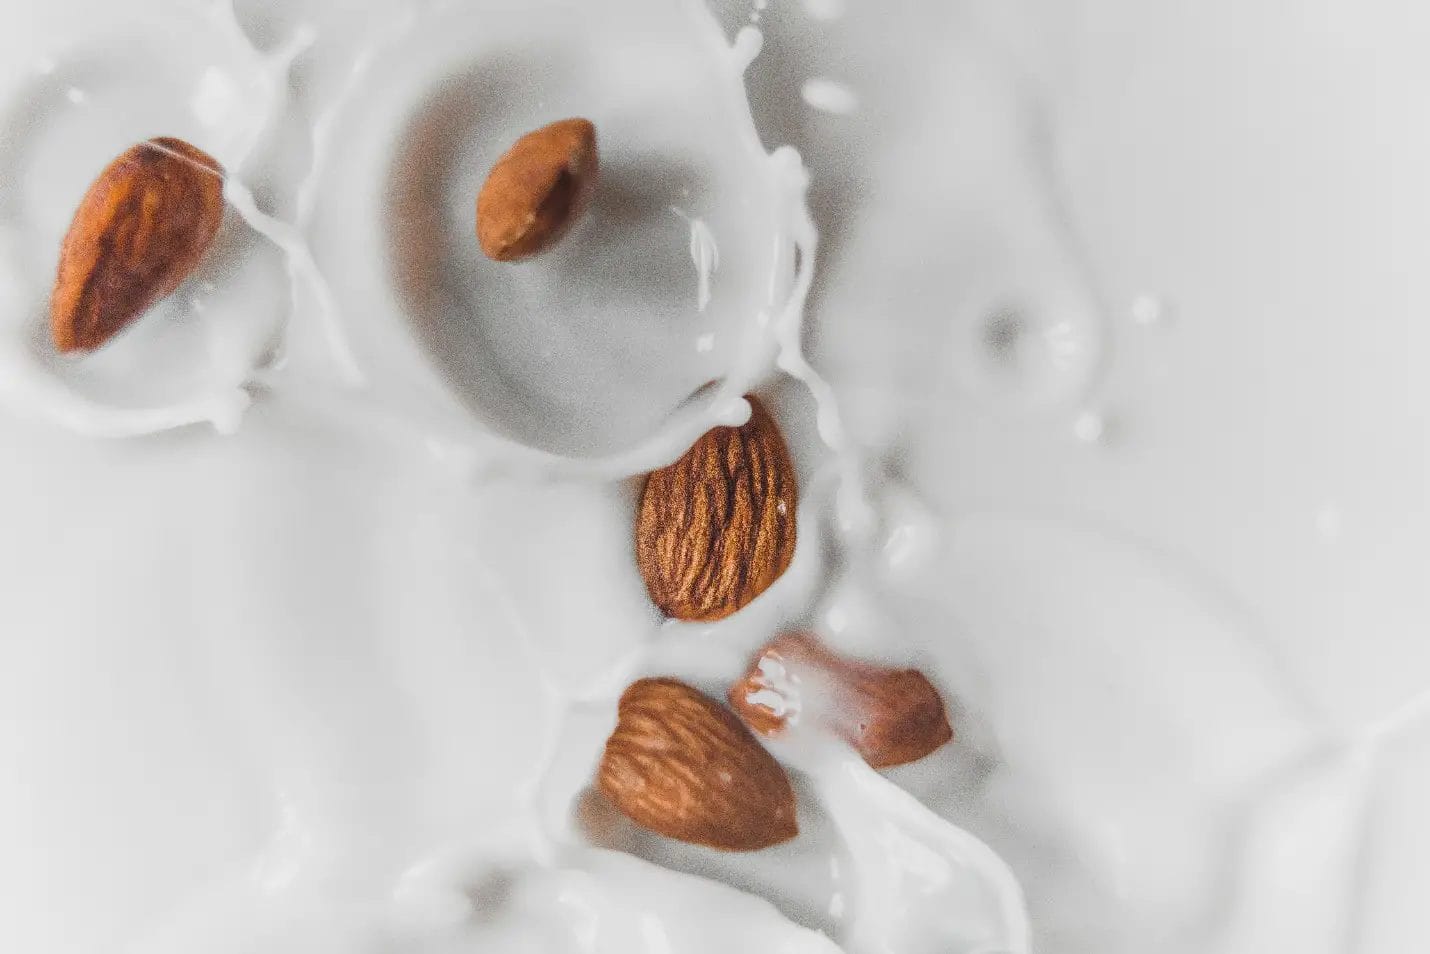 How to Prepare Fresh Almond Milk at Home?